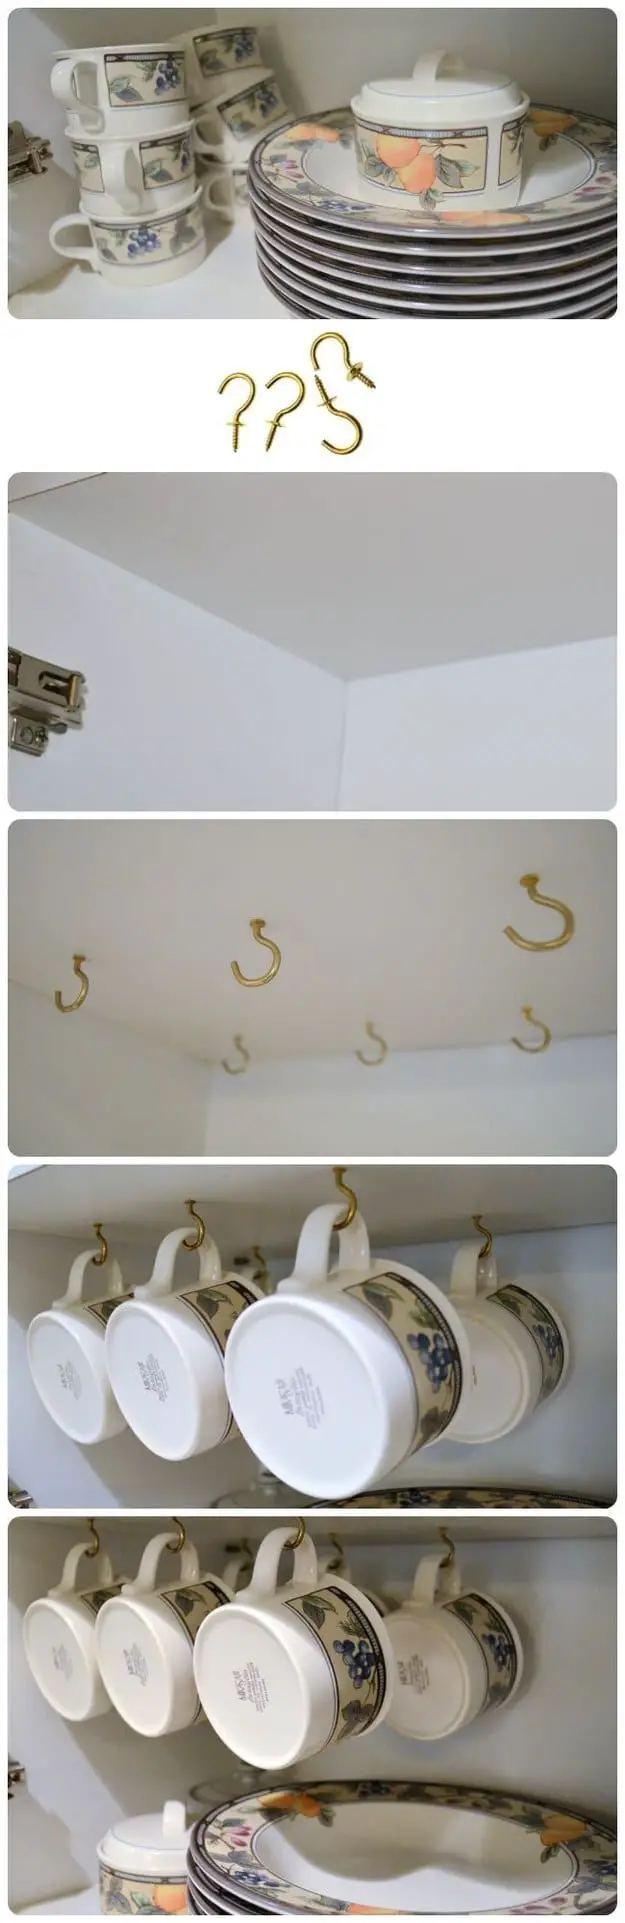 Hang Teacups and Mugs, , Small space living hacks and diy ideas